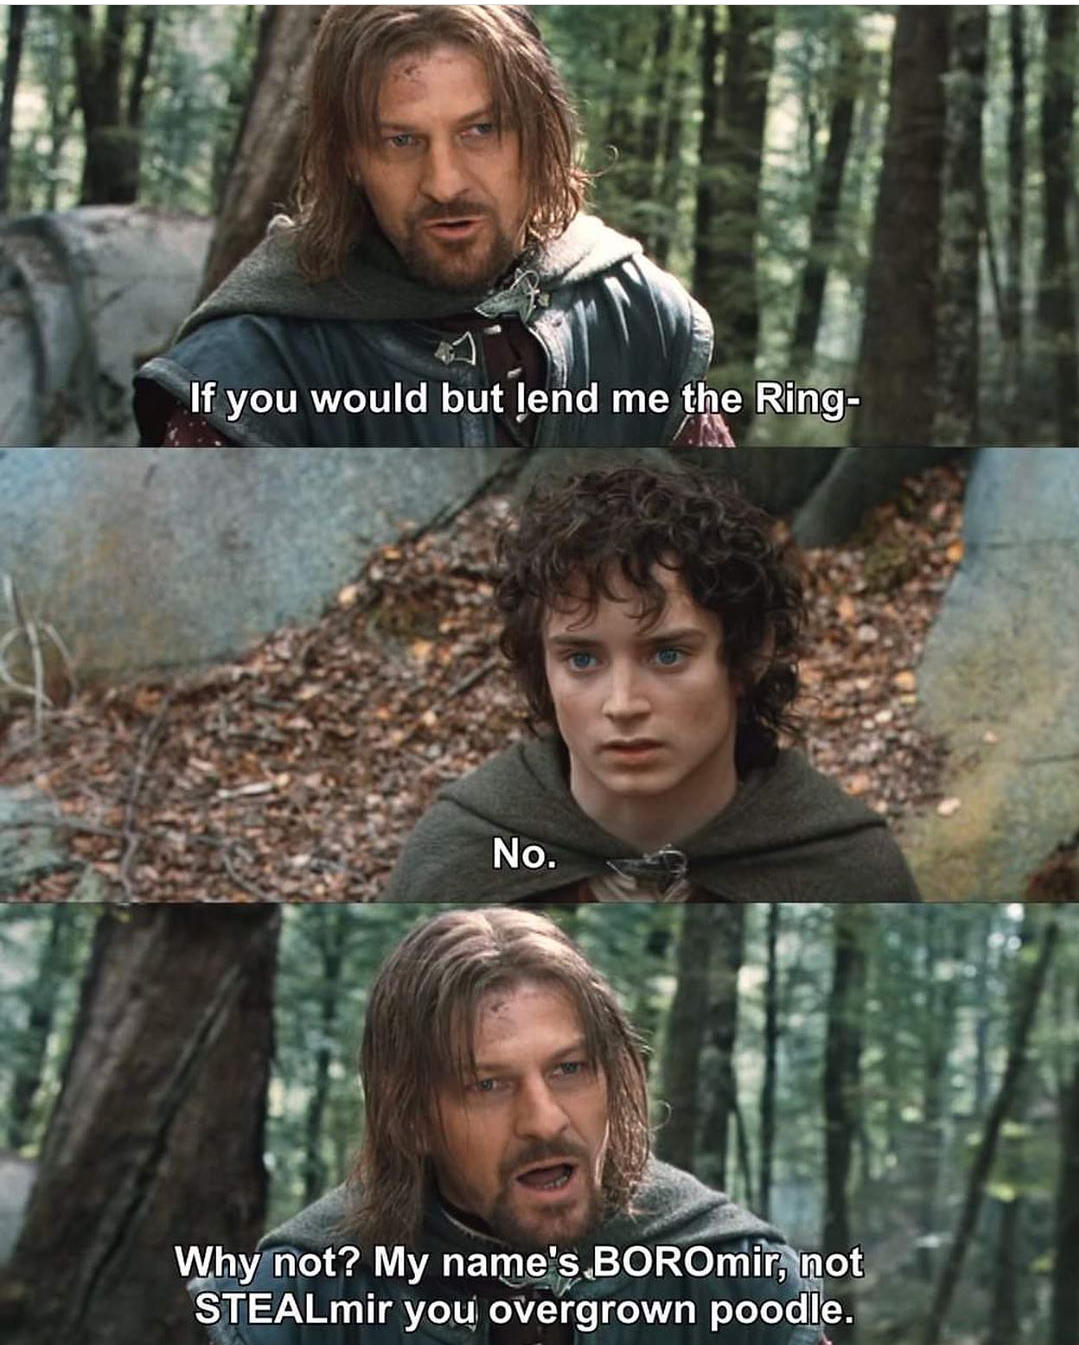 boromir ring meme - If you would but end me the Ring No. Why not? My name's BOROmir, not STEALmir you overgrown poodle.